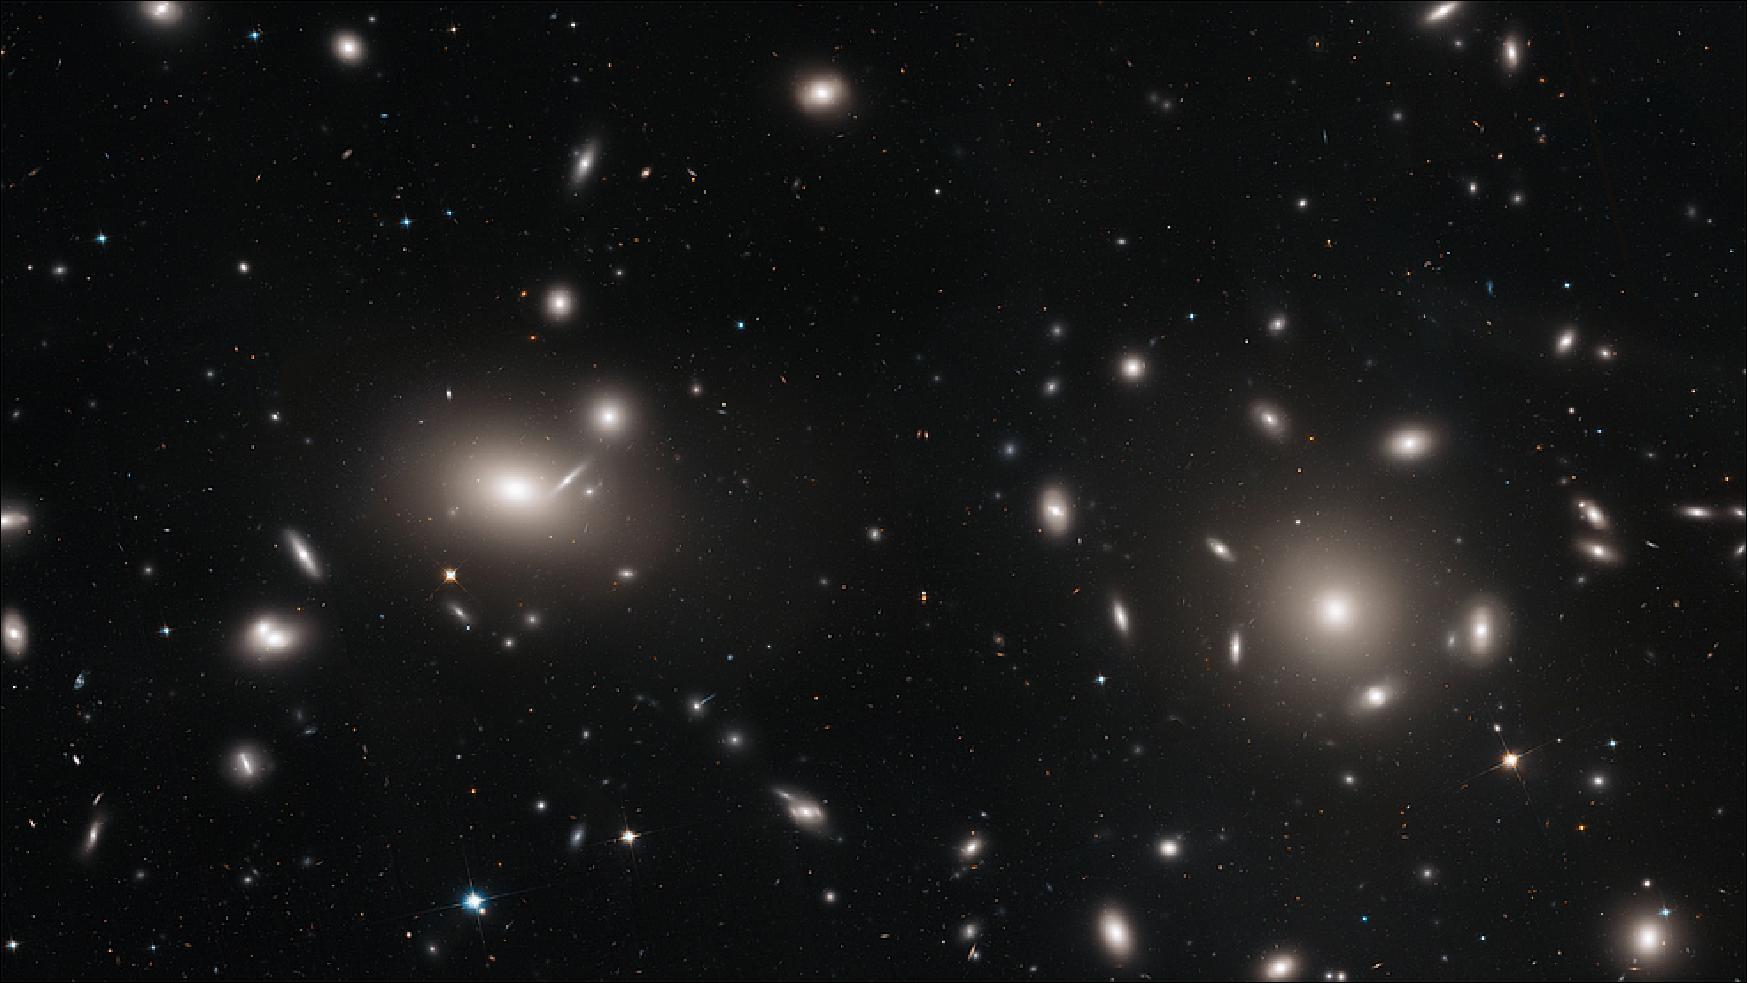 Figure 5: This is a Hubble Space Telescope mosaic of a portion of the immense Coma cluster of over 1,000 galaxies, located 300 million light-years from Earth. Hubble's incredible sharpness was used to do a comprehensive census of the cluster's most diminutive members: a whopping 22,426 globular star clusters. Among the earliest homesteaders of the universe, globular star clusters are snow-globe-shaped islands of several hundred thousand ancient stars. The survey found the globular clusters scattered in the space between the galaxies. They have been orphaned from their home galaxies through galaxy tidal interactions within the bustling cluster. Astronomers will use the globular cluster field for mapping the distribution of matter and dark matter in the Coma galaxy cluster [image credit: NASA, ESA, J. Mack (STScI) and J. Madrid (Australian Telescope National Facility)]